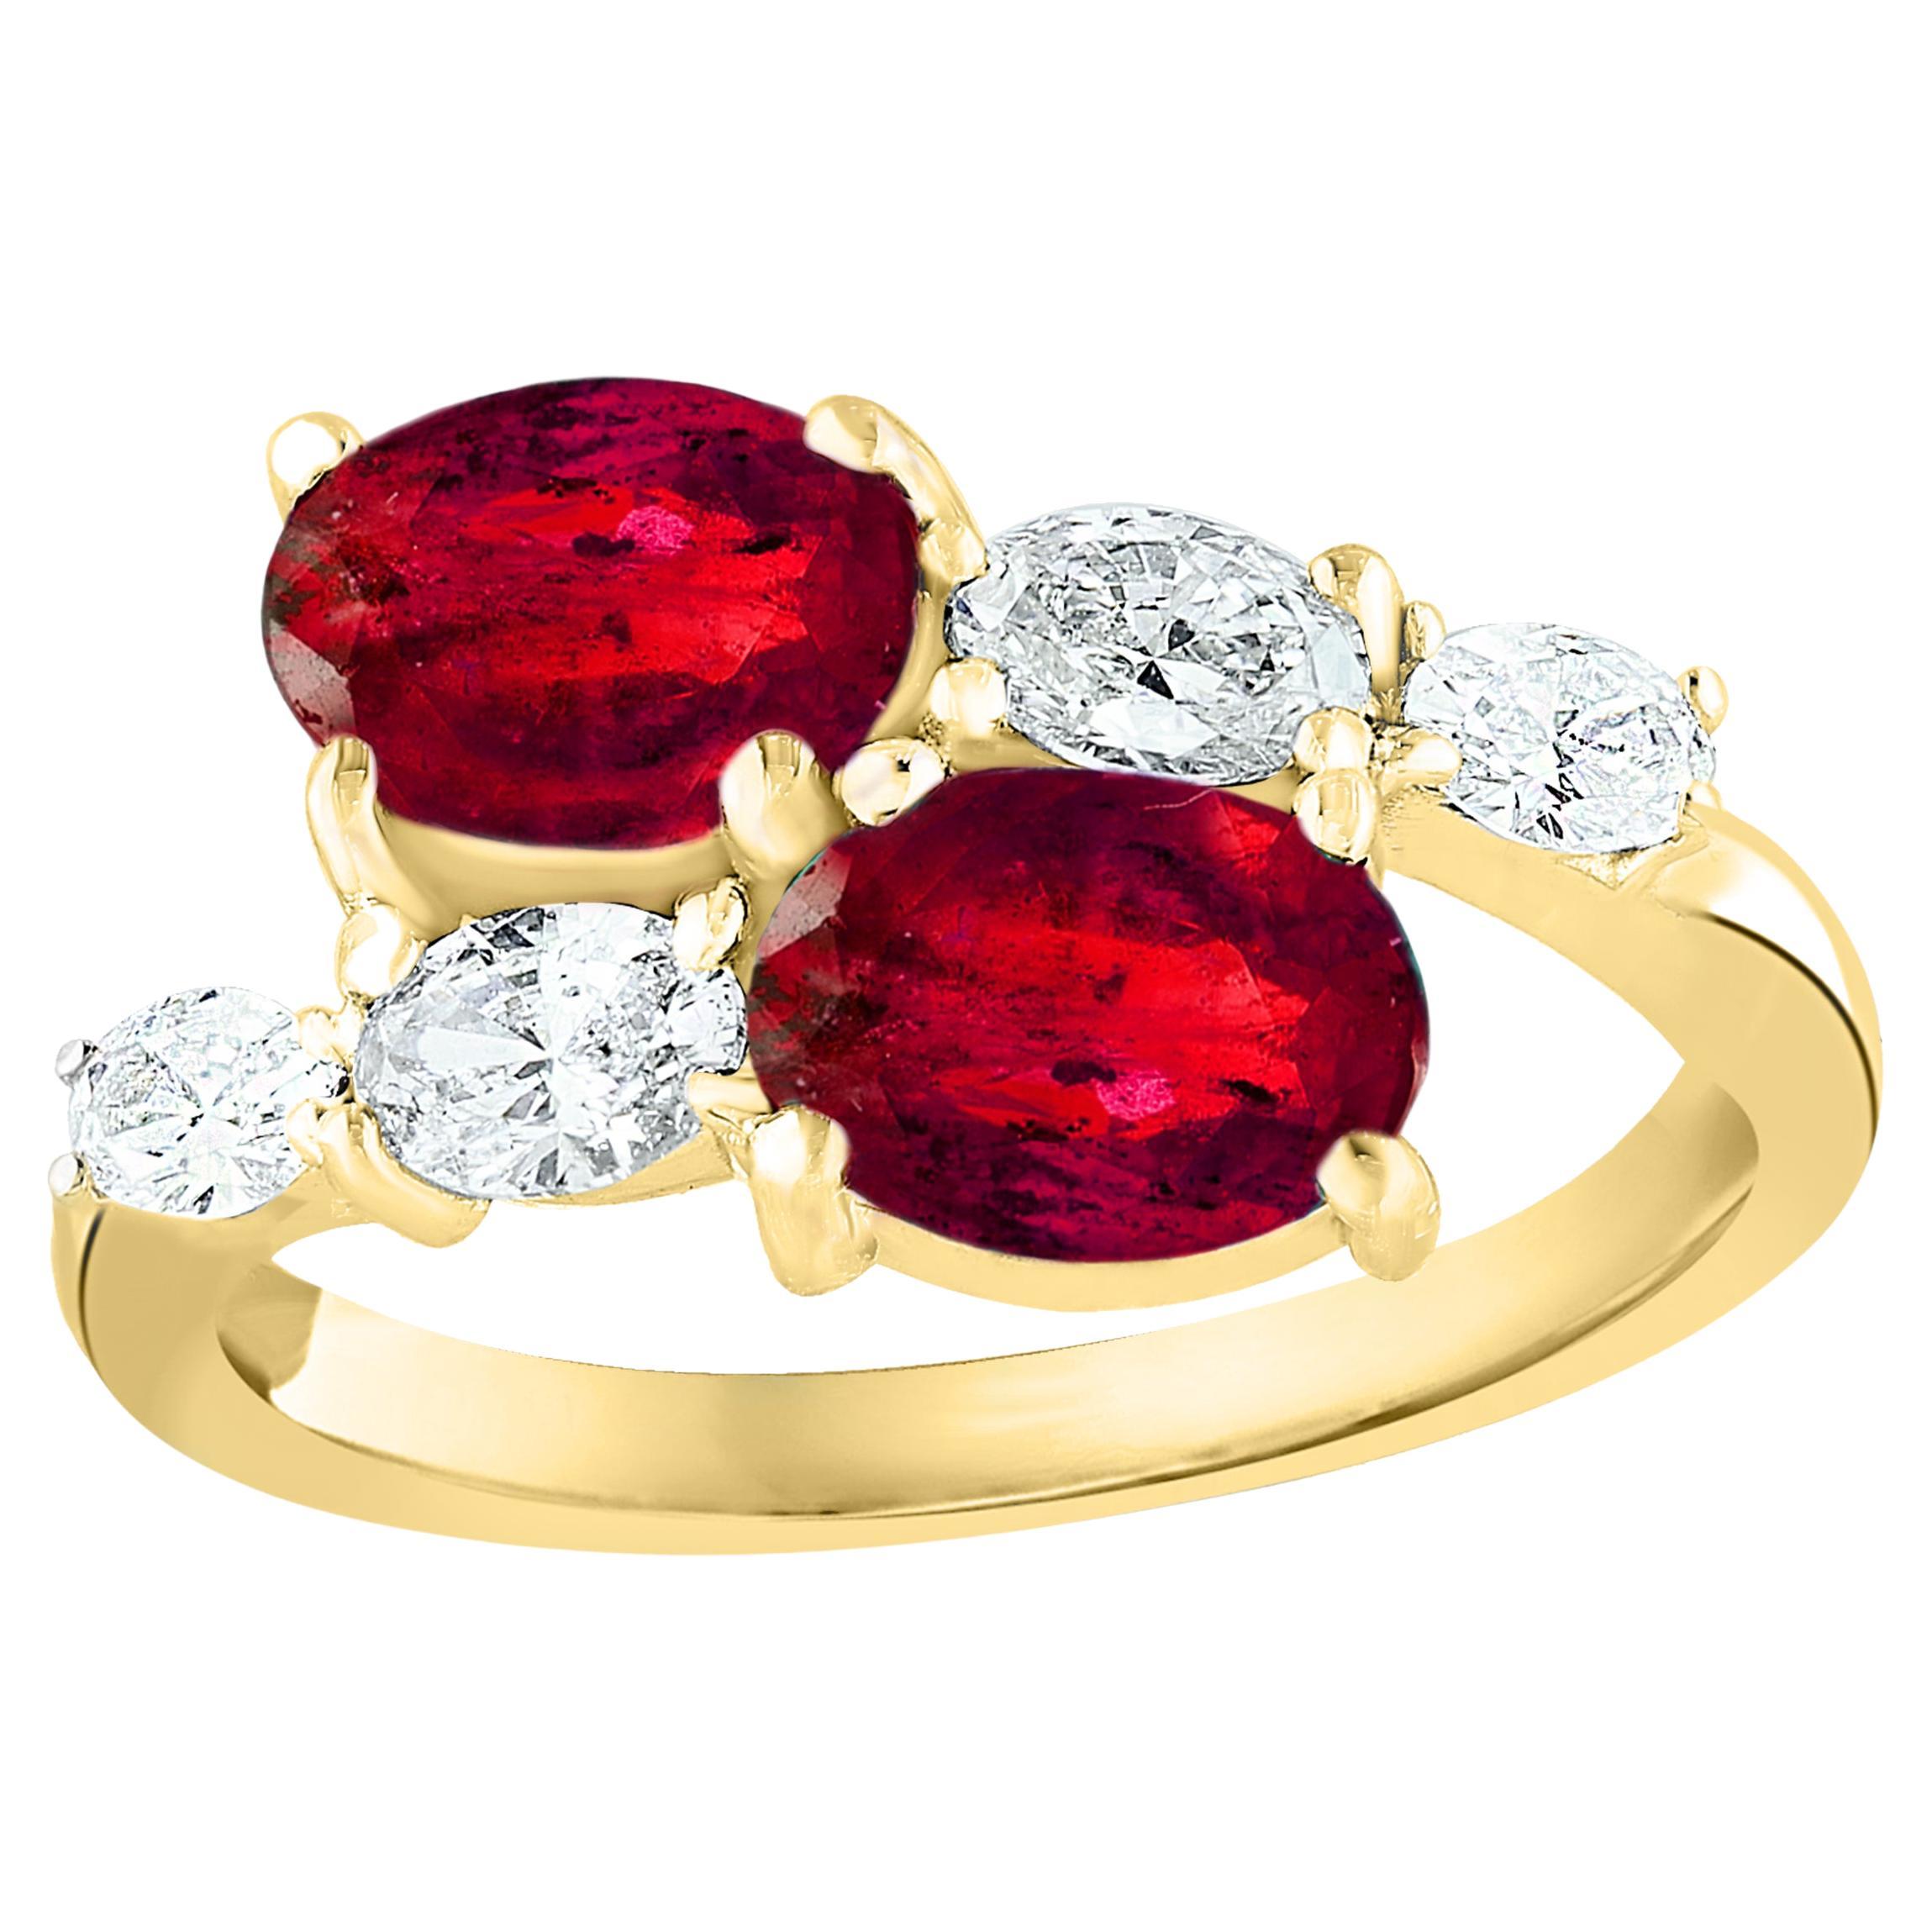 2.18 Carat Oval Cut Ruby Diamond Toi et Moi Engagement Ring in 14K Yellow Gold For Sale